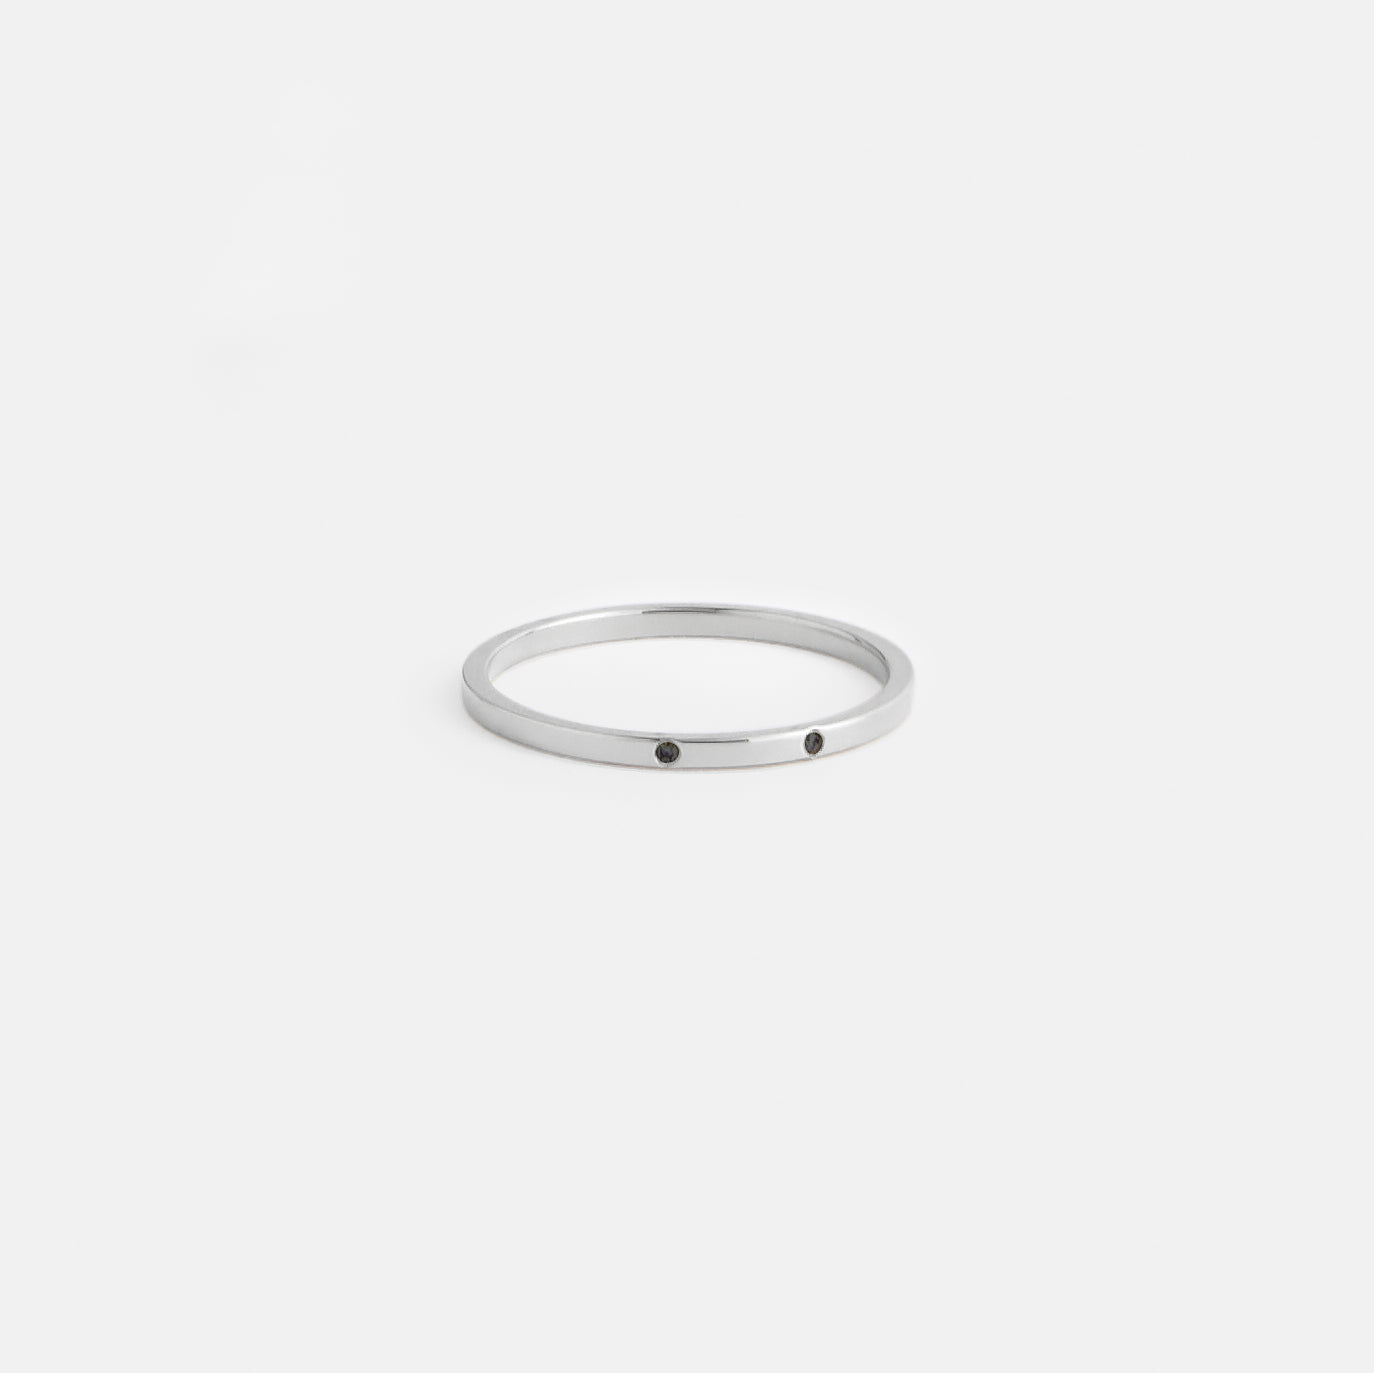 Sarala MInimalist Ring in Sterling SIlver set with Black Diamonds By SHW Fine Jewelry New York City